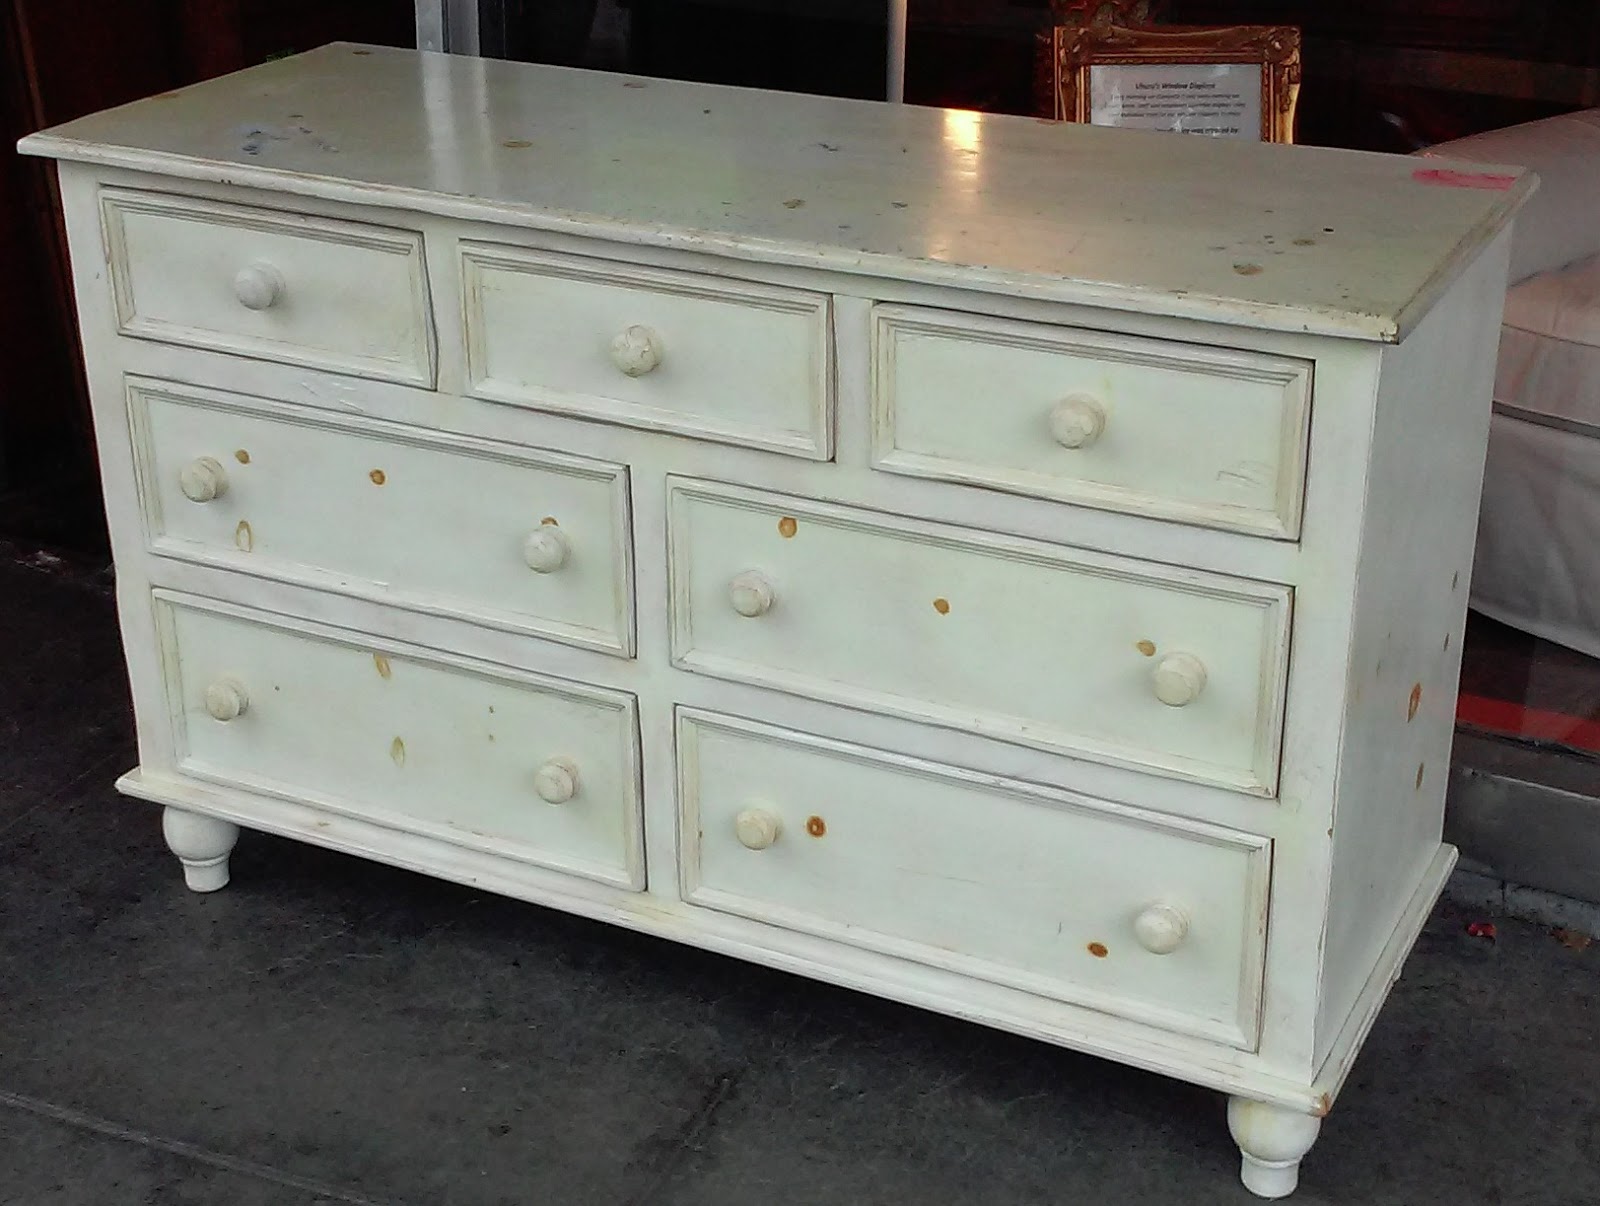 Uhuru Furniture Collectibles Sold 5949 Knotty Pine Shabby Chic